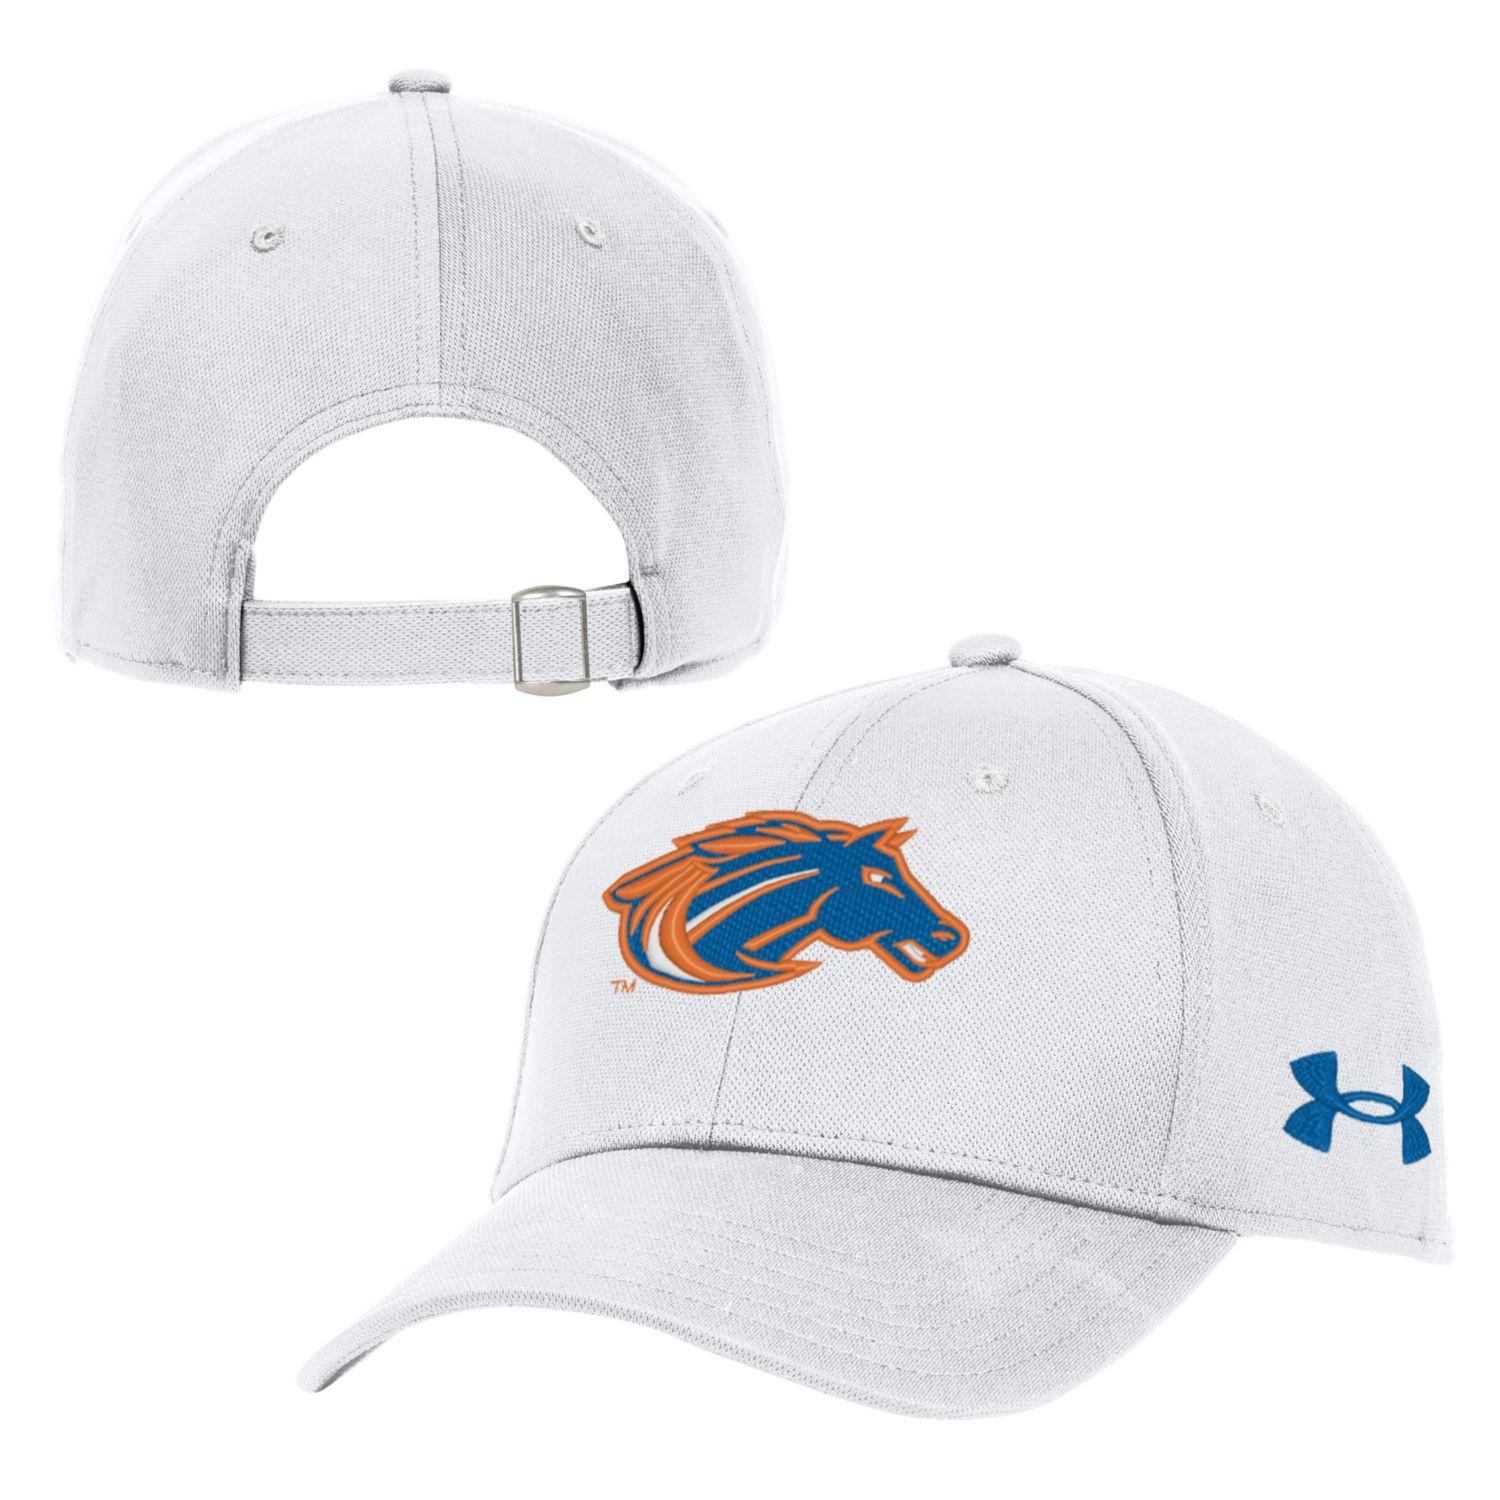 Under Armour Mens Hat (23-24)  The Mustang Stable @ Sheyenne High School